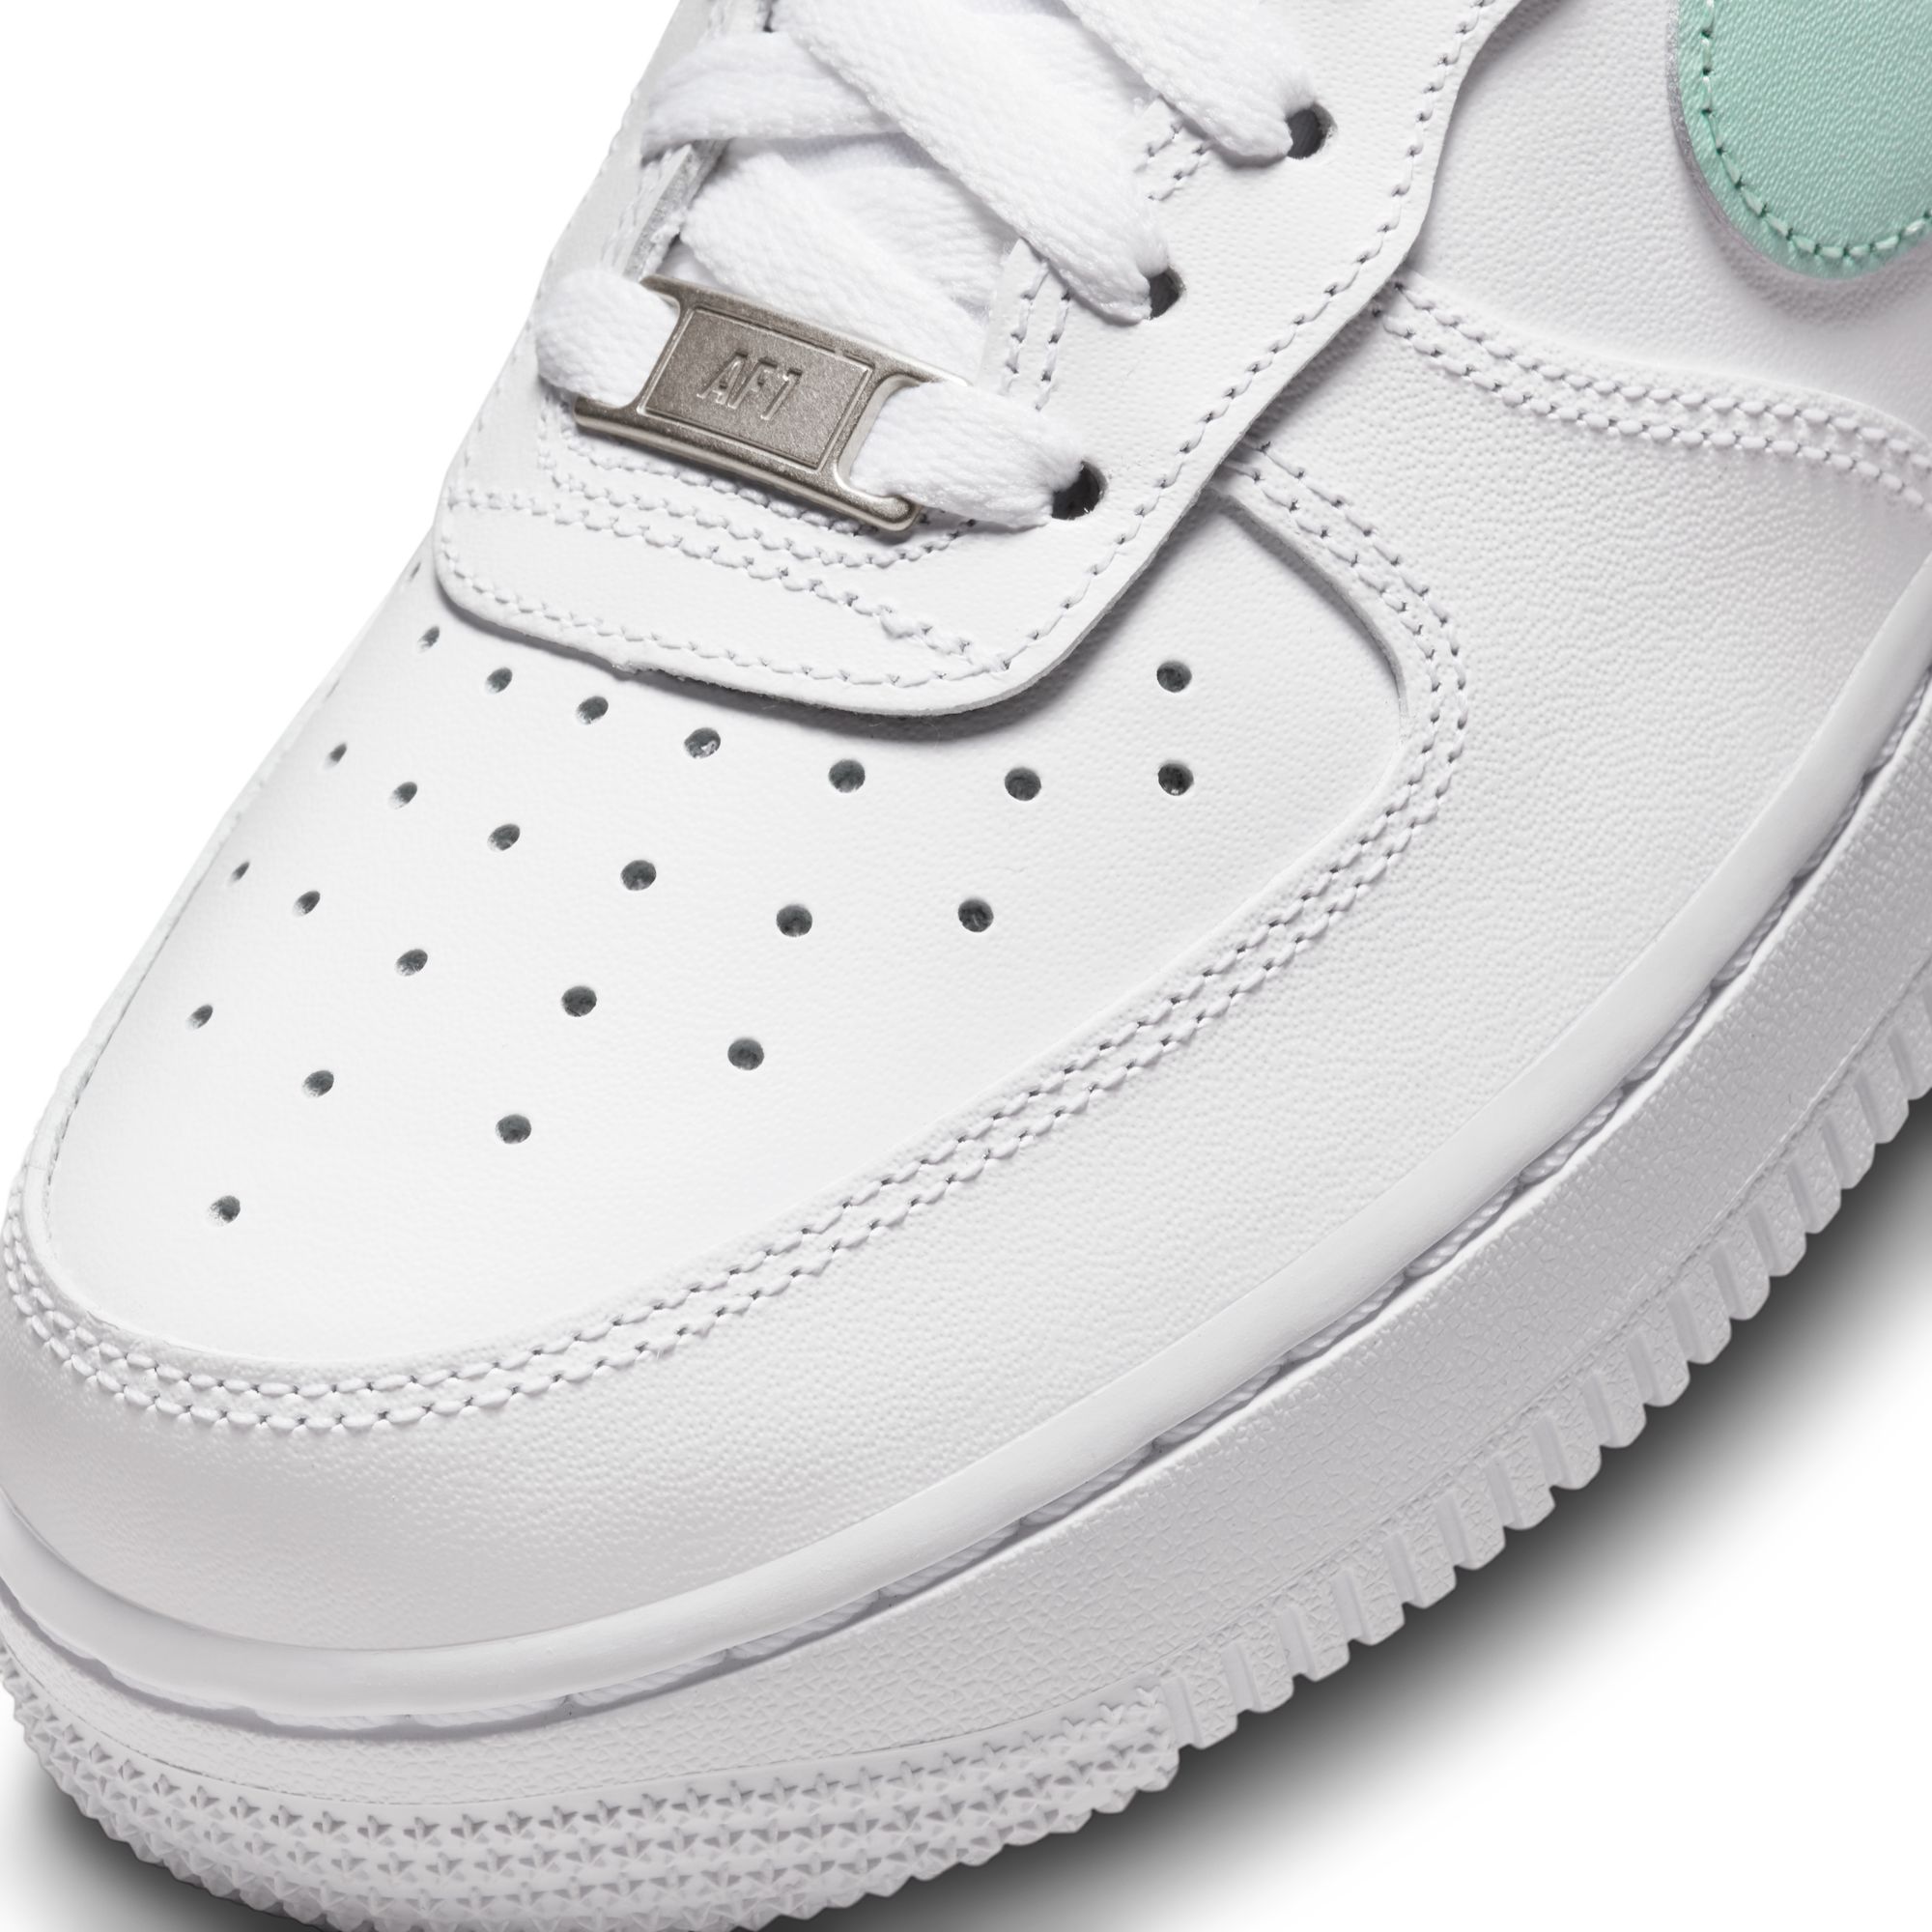 GIÀY NIKE NỮ AIR FORCE 1 07 EASYON WHITE ICE JADE WOMENS SHOES DX5883-101 1